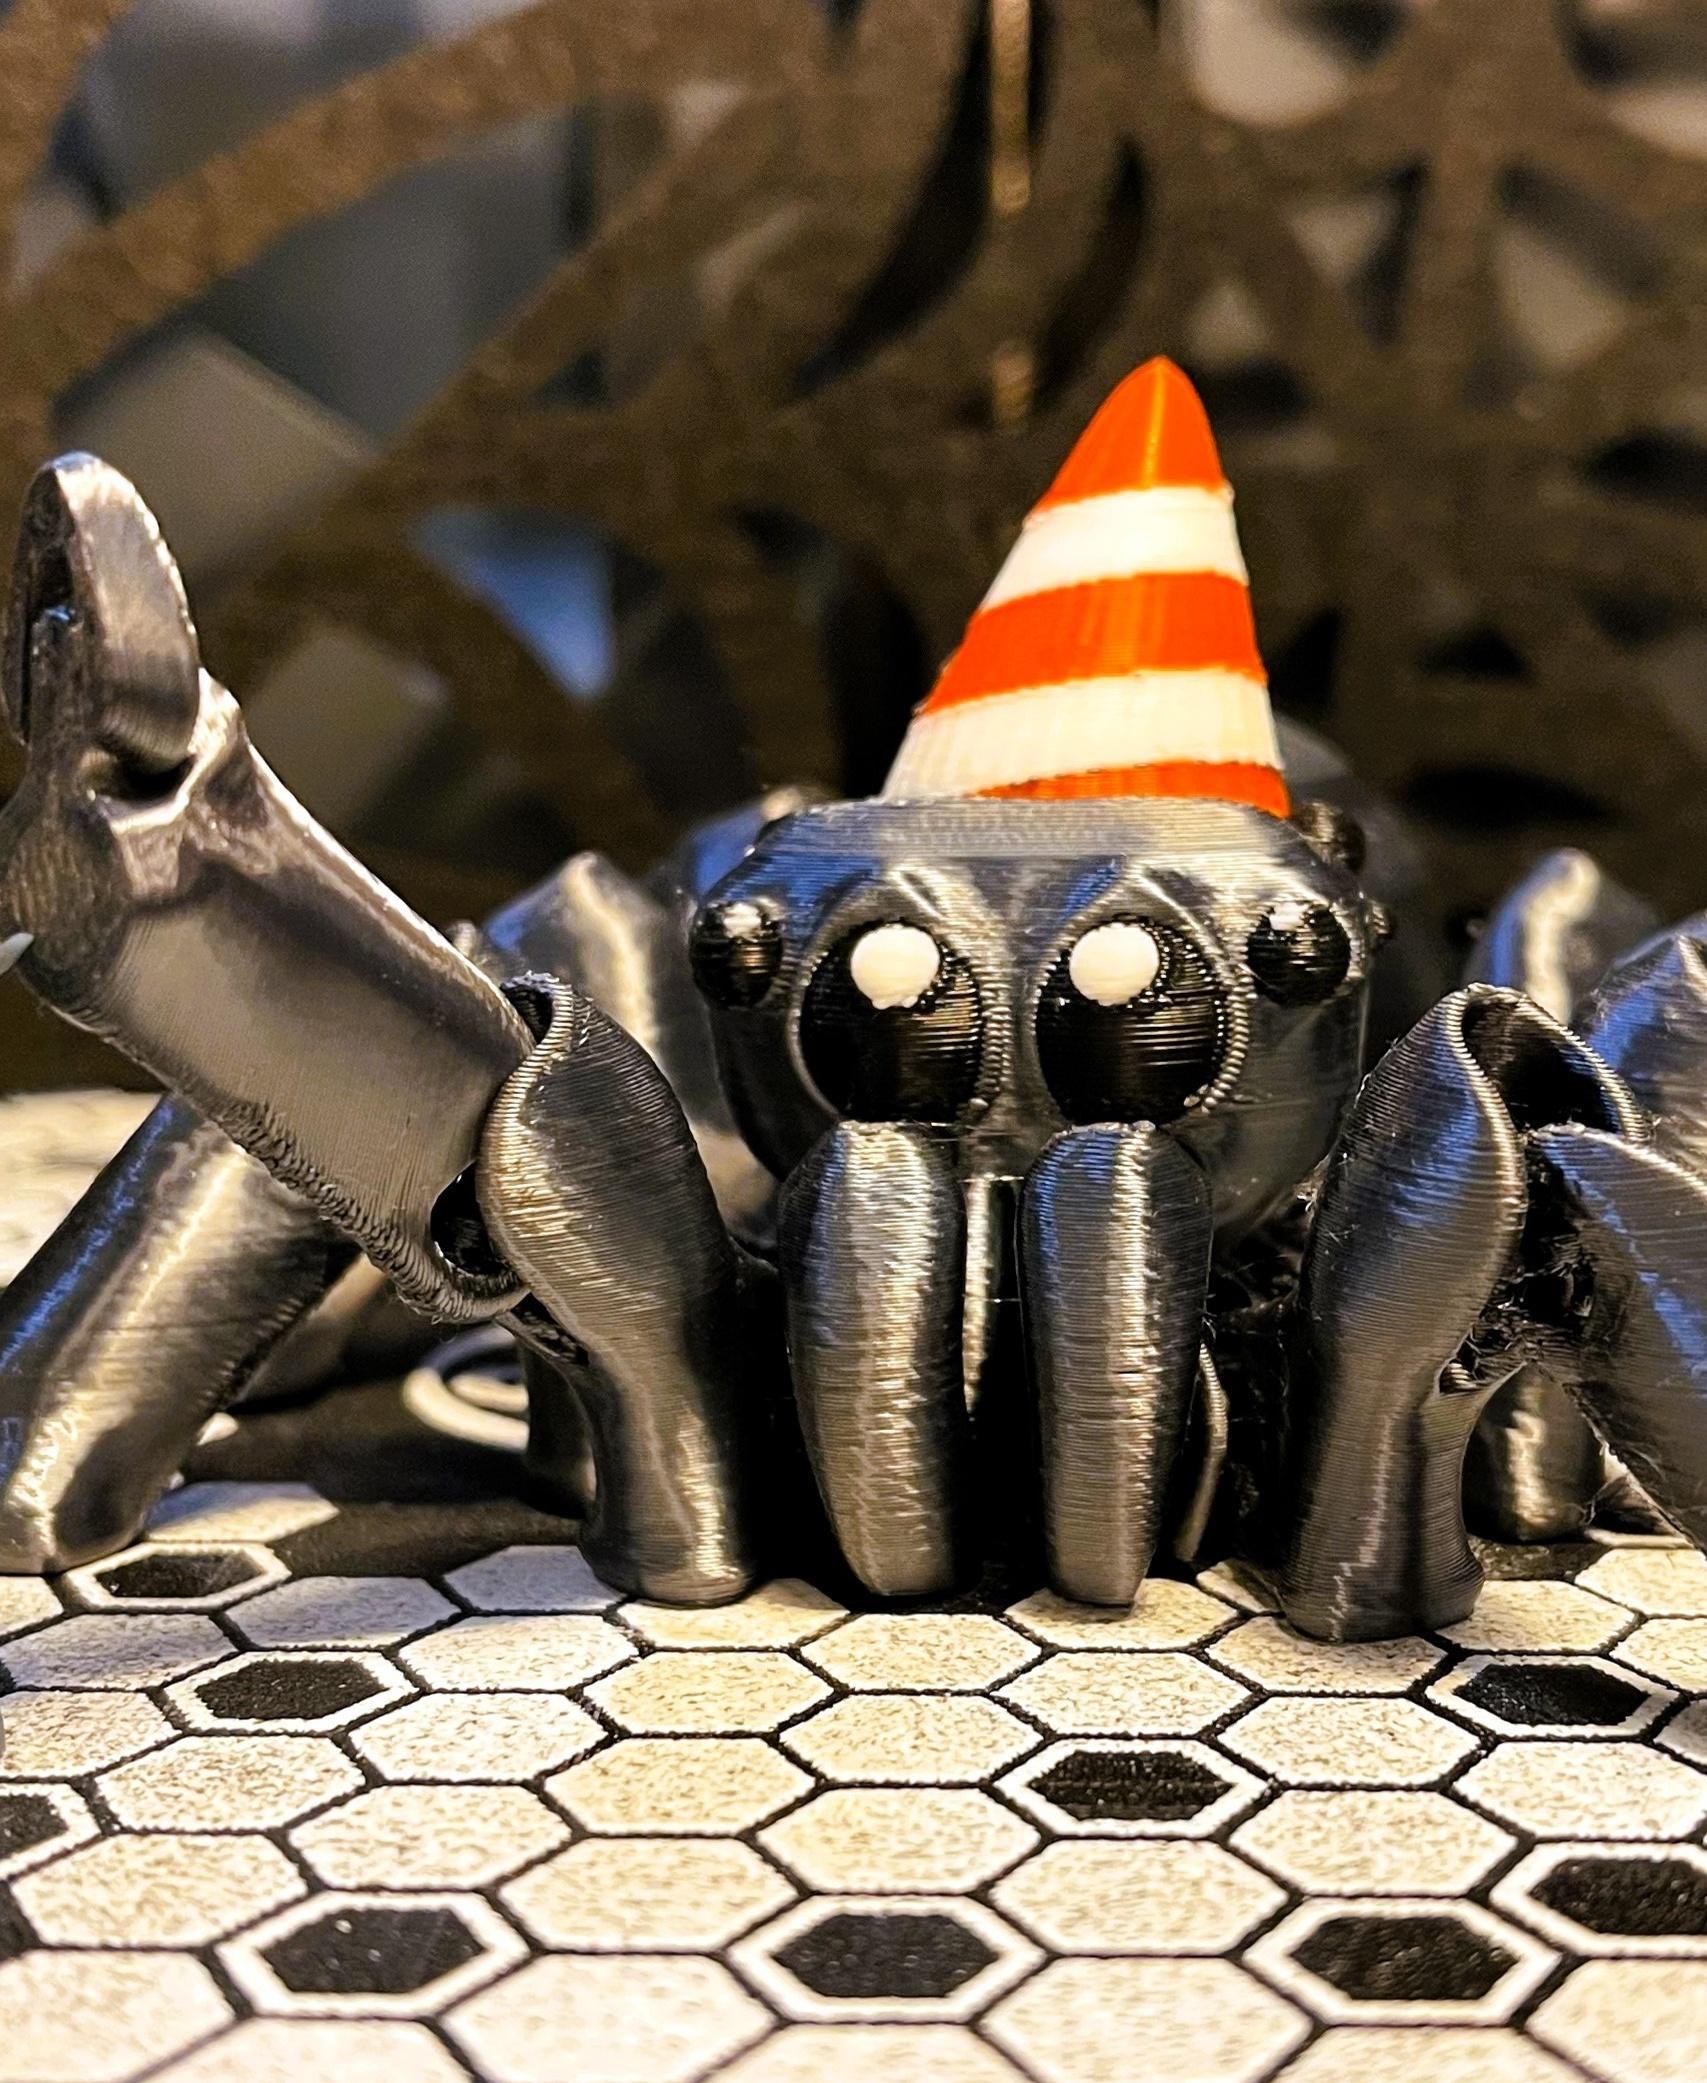 Articulated Toy Spider - Webmaster Fred giving Codex a High Five - 3d model